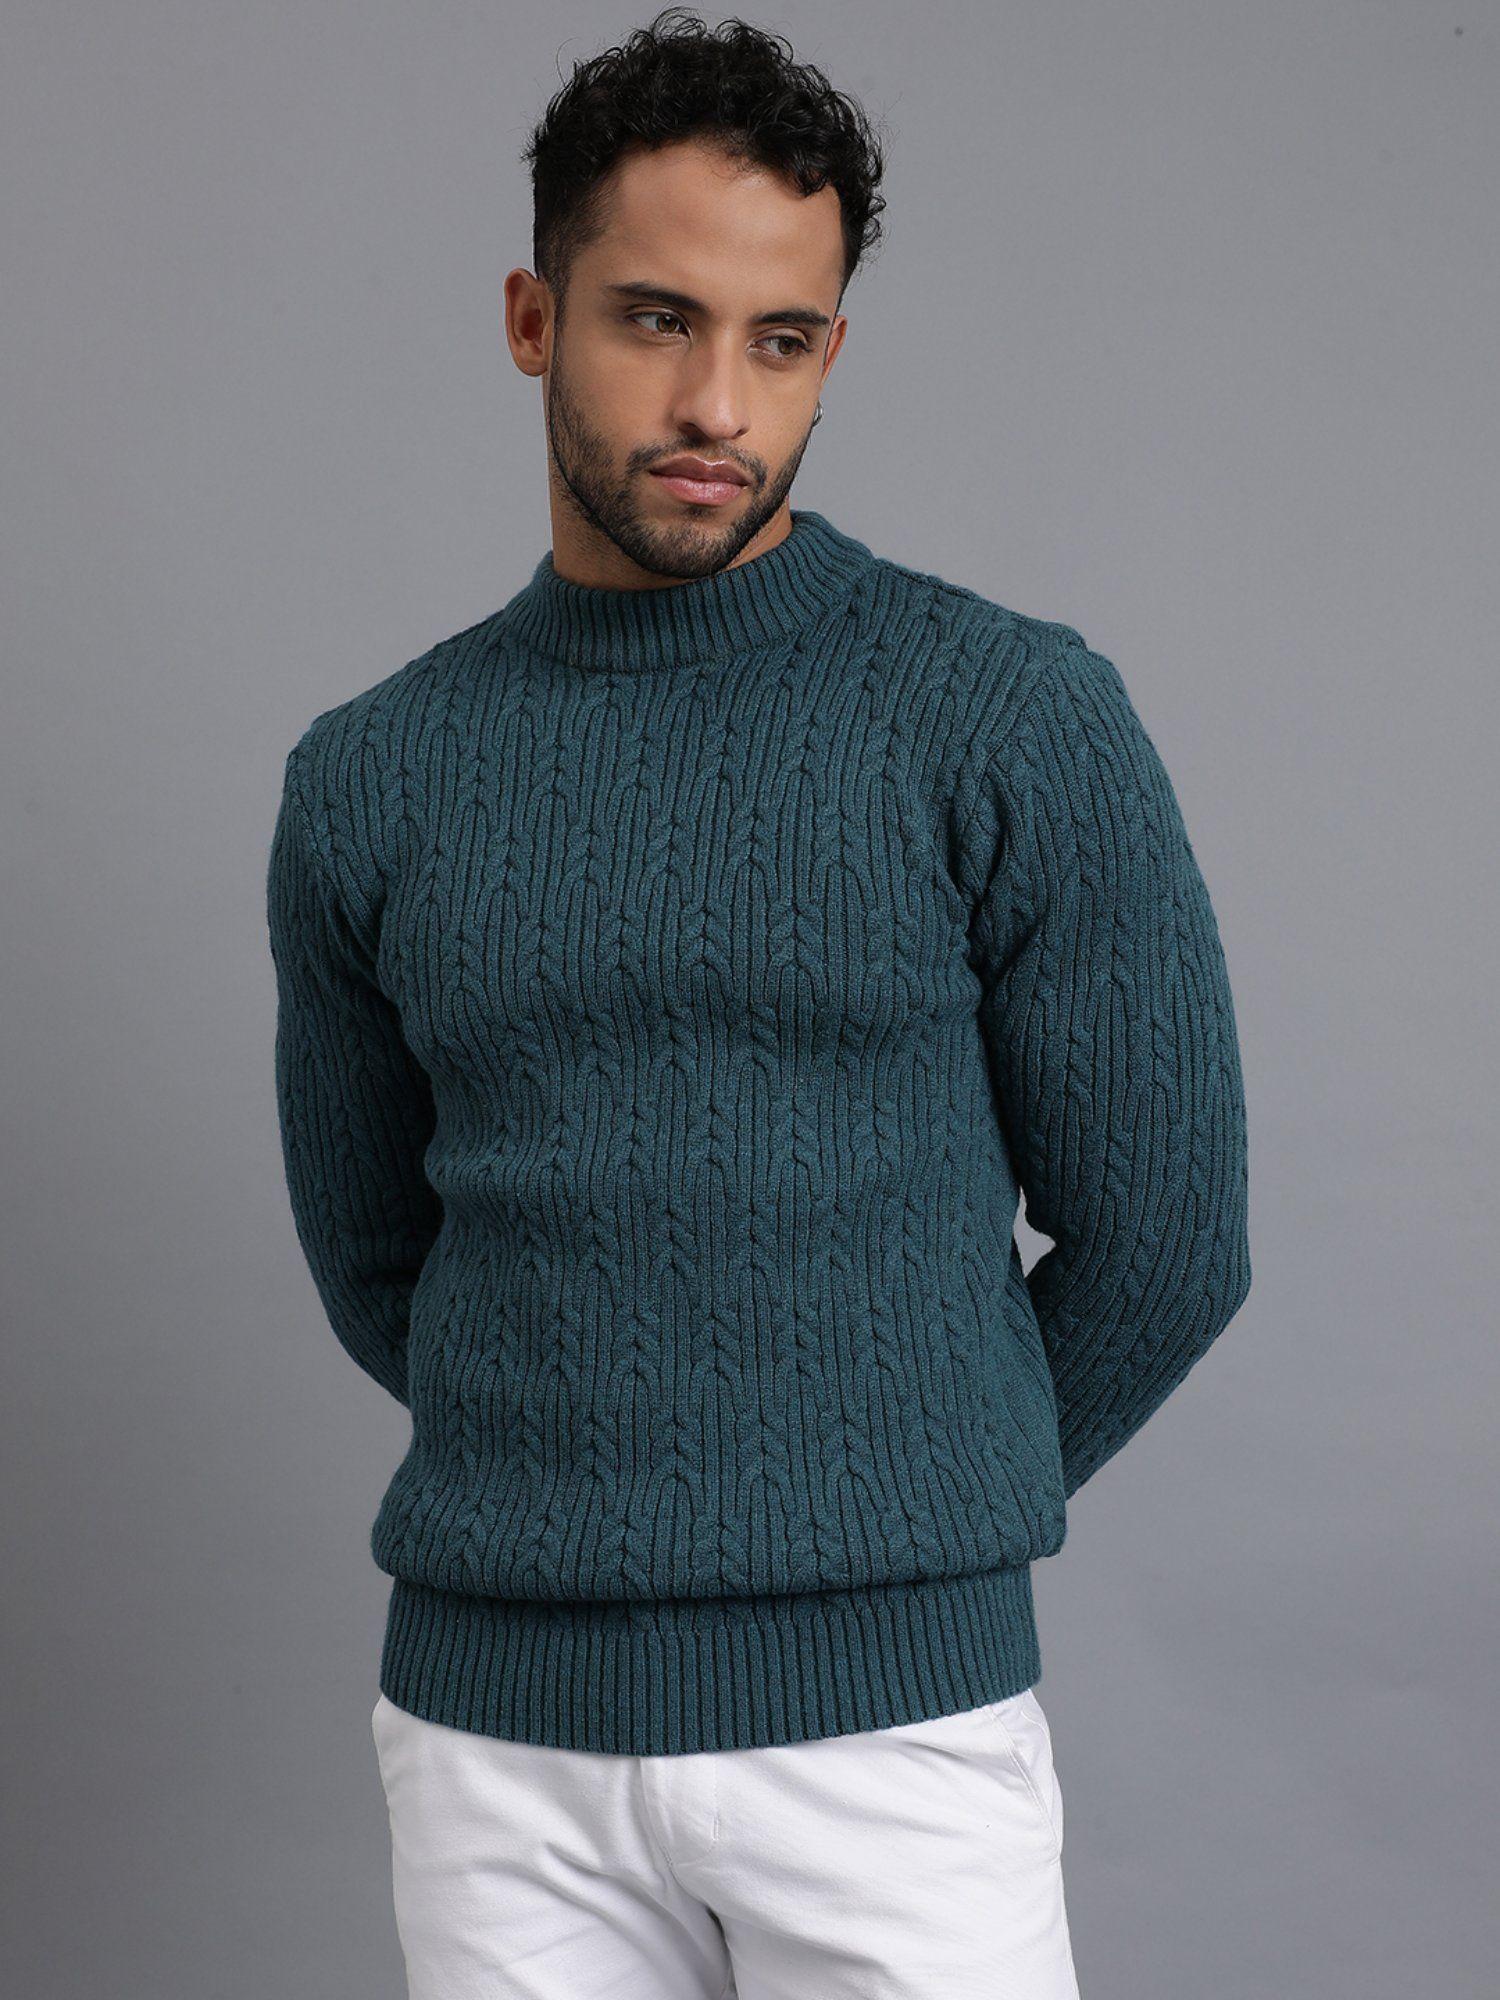 emerald teal luxury all over heavy cable knitted mens wool pullover sweater